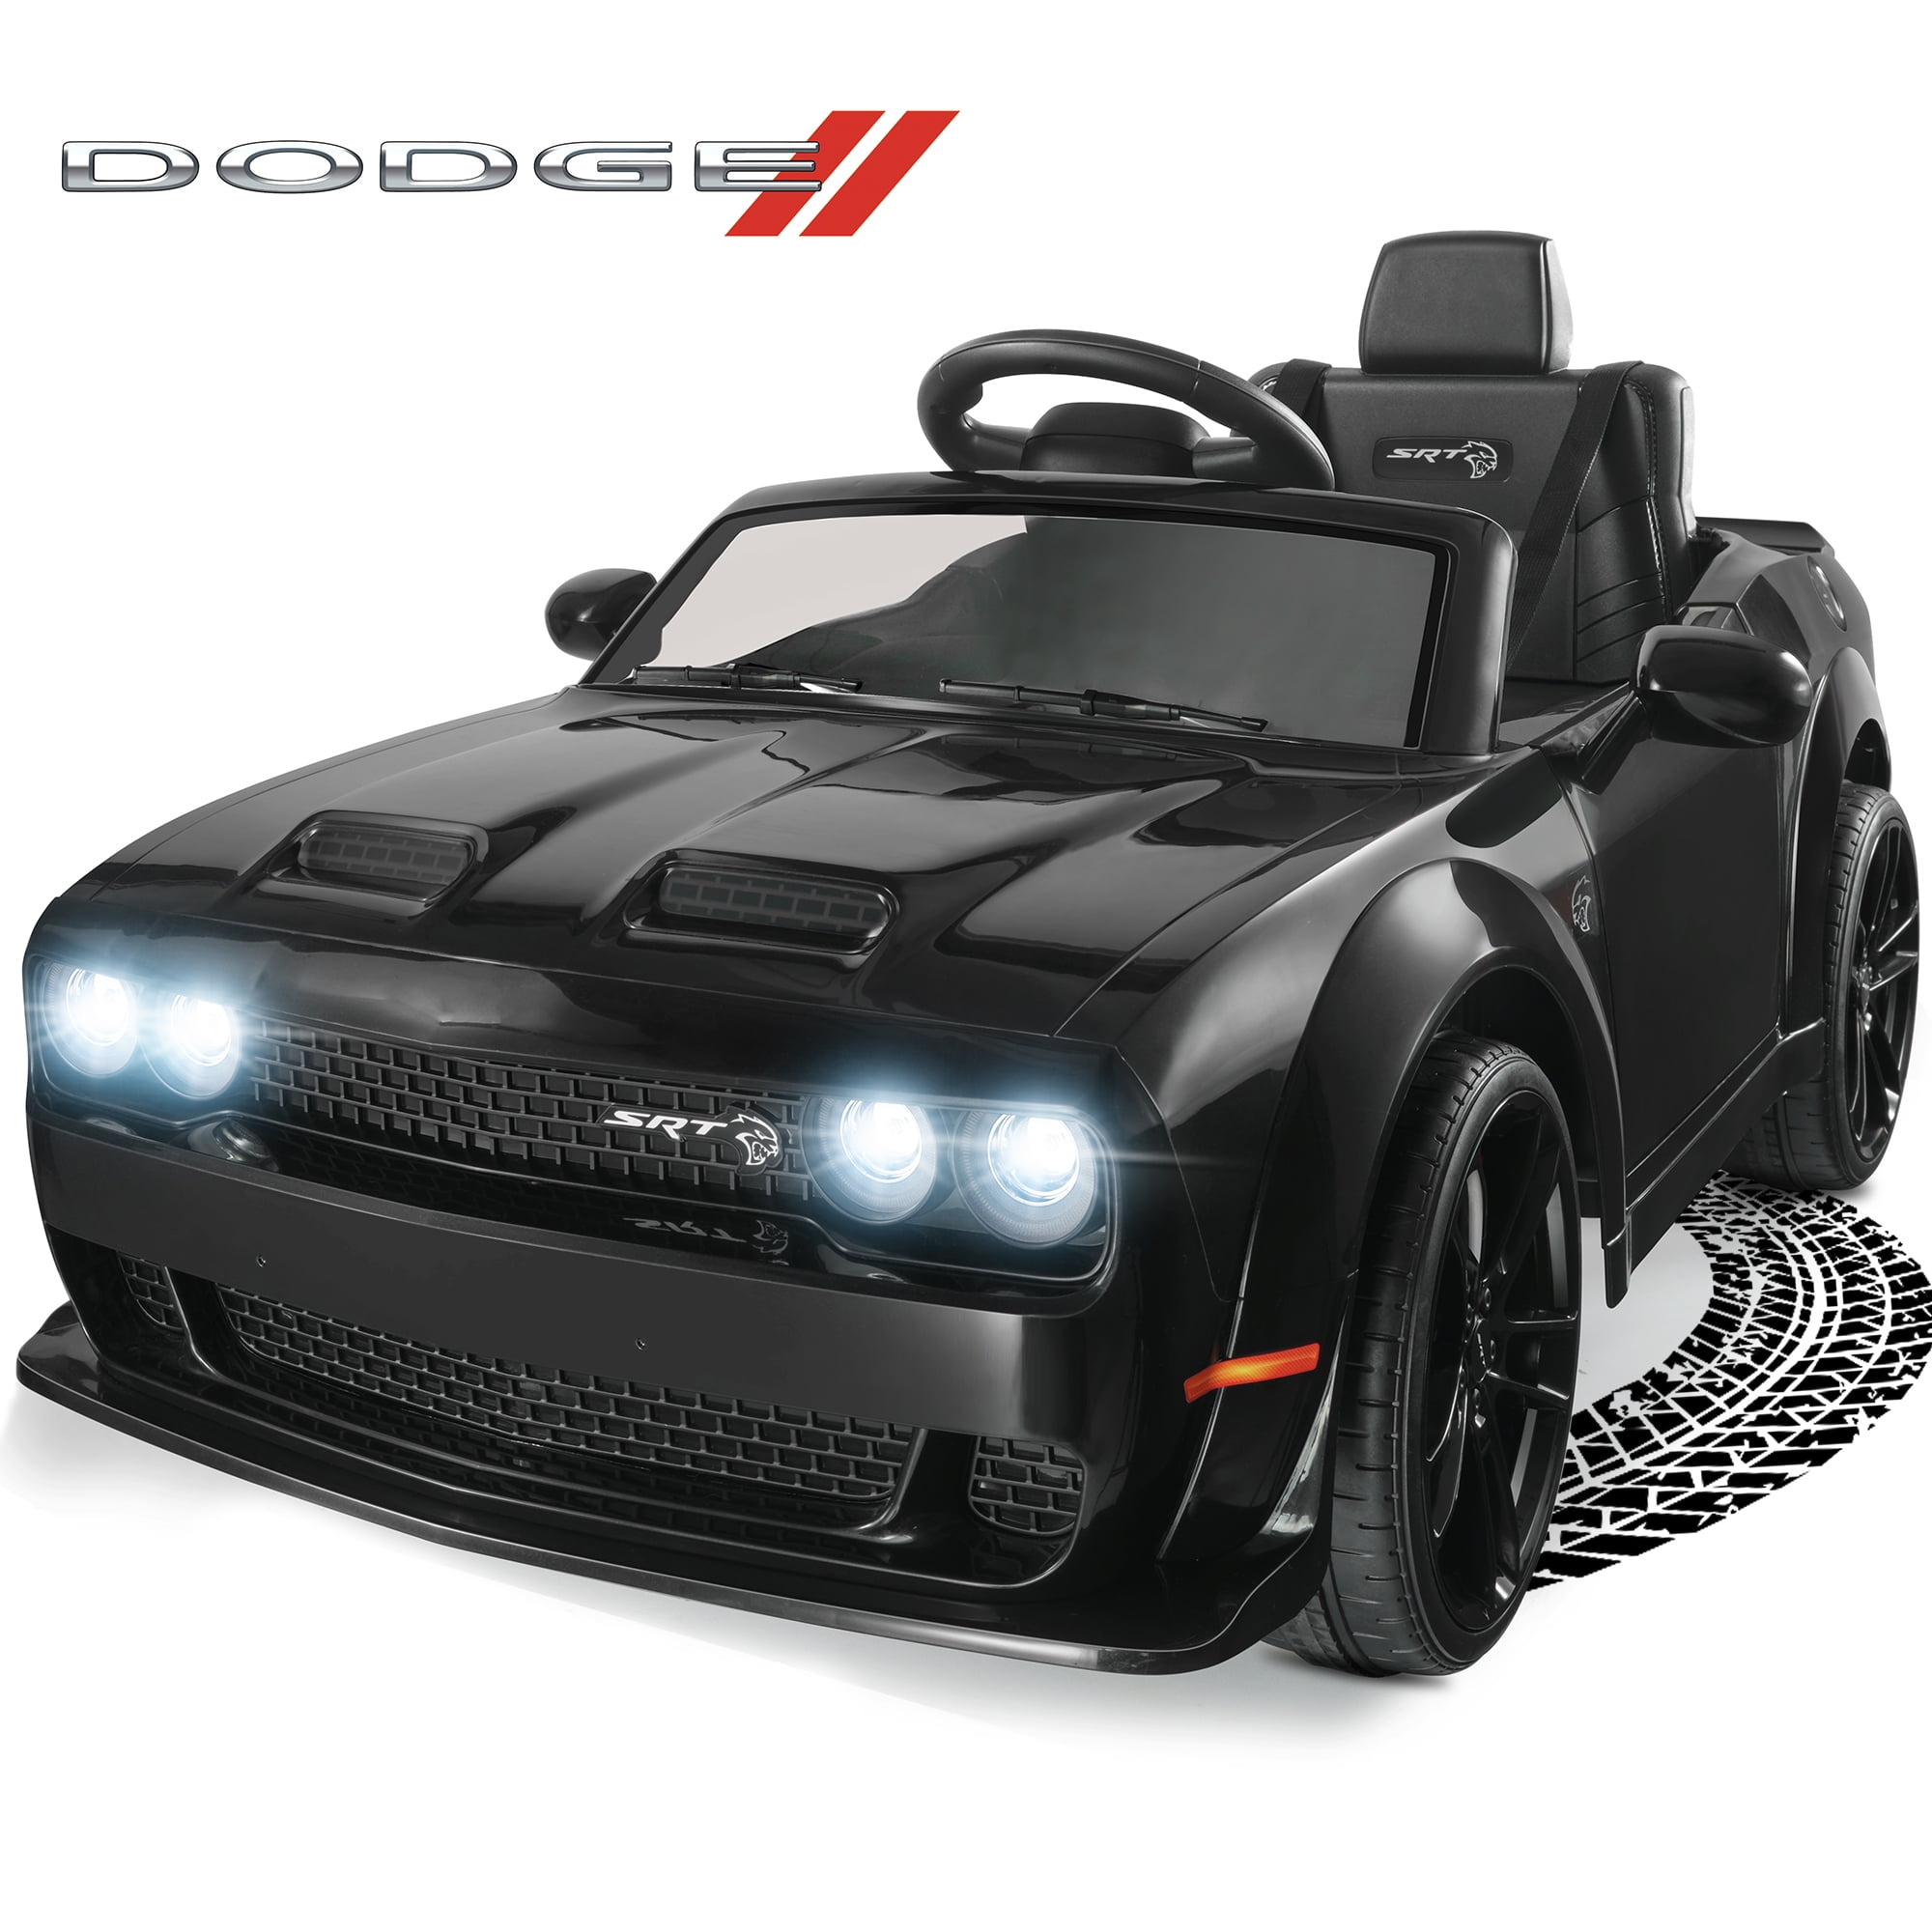 Dodge Challenger 12 V Powered Ride On Car with Remote Control, SRT